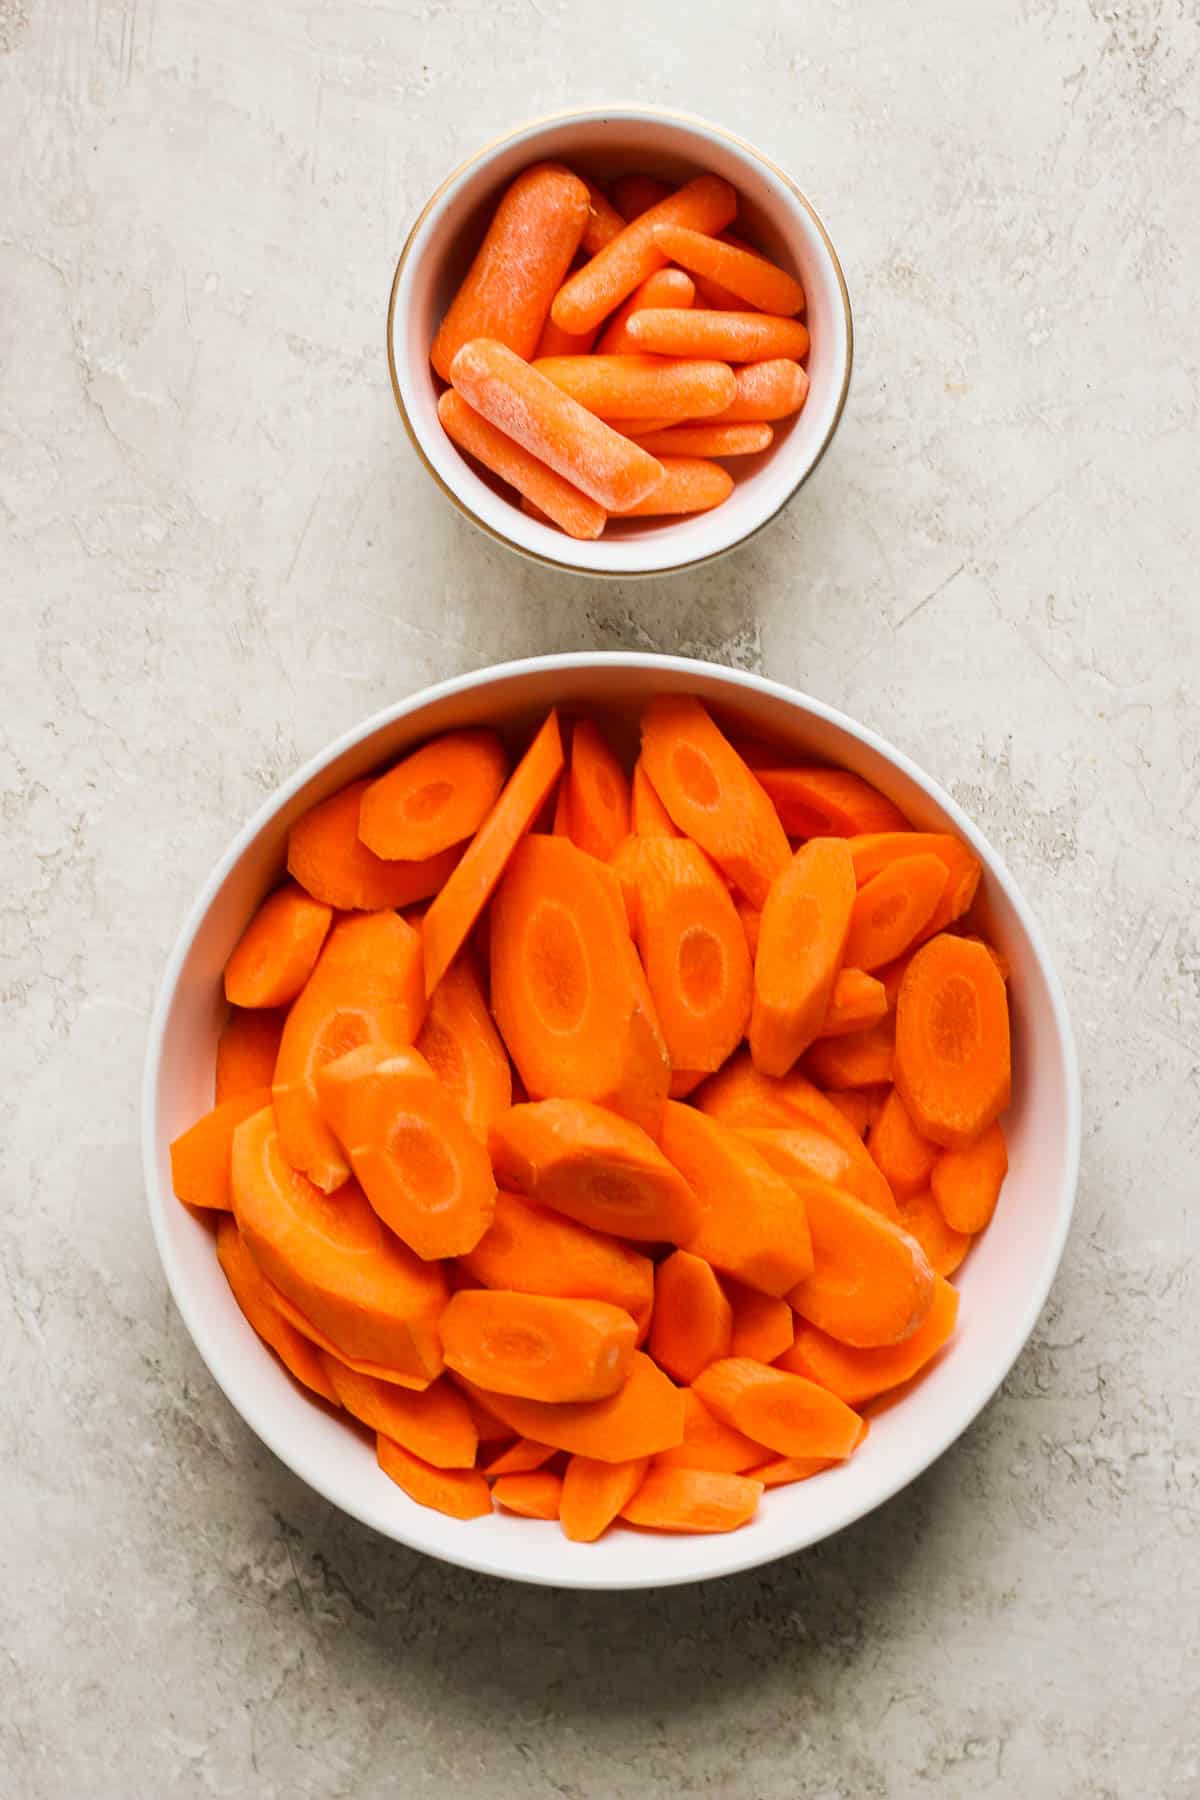 Raw baby carrots and carrot coins in white bowls.